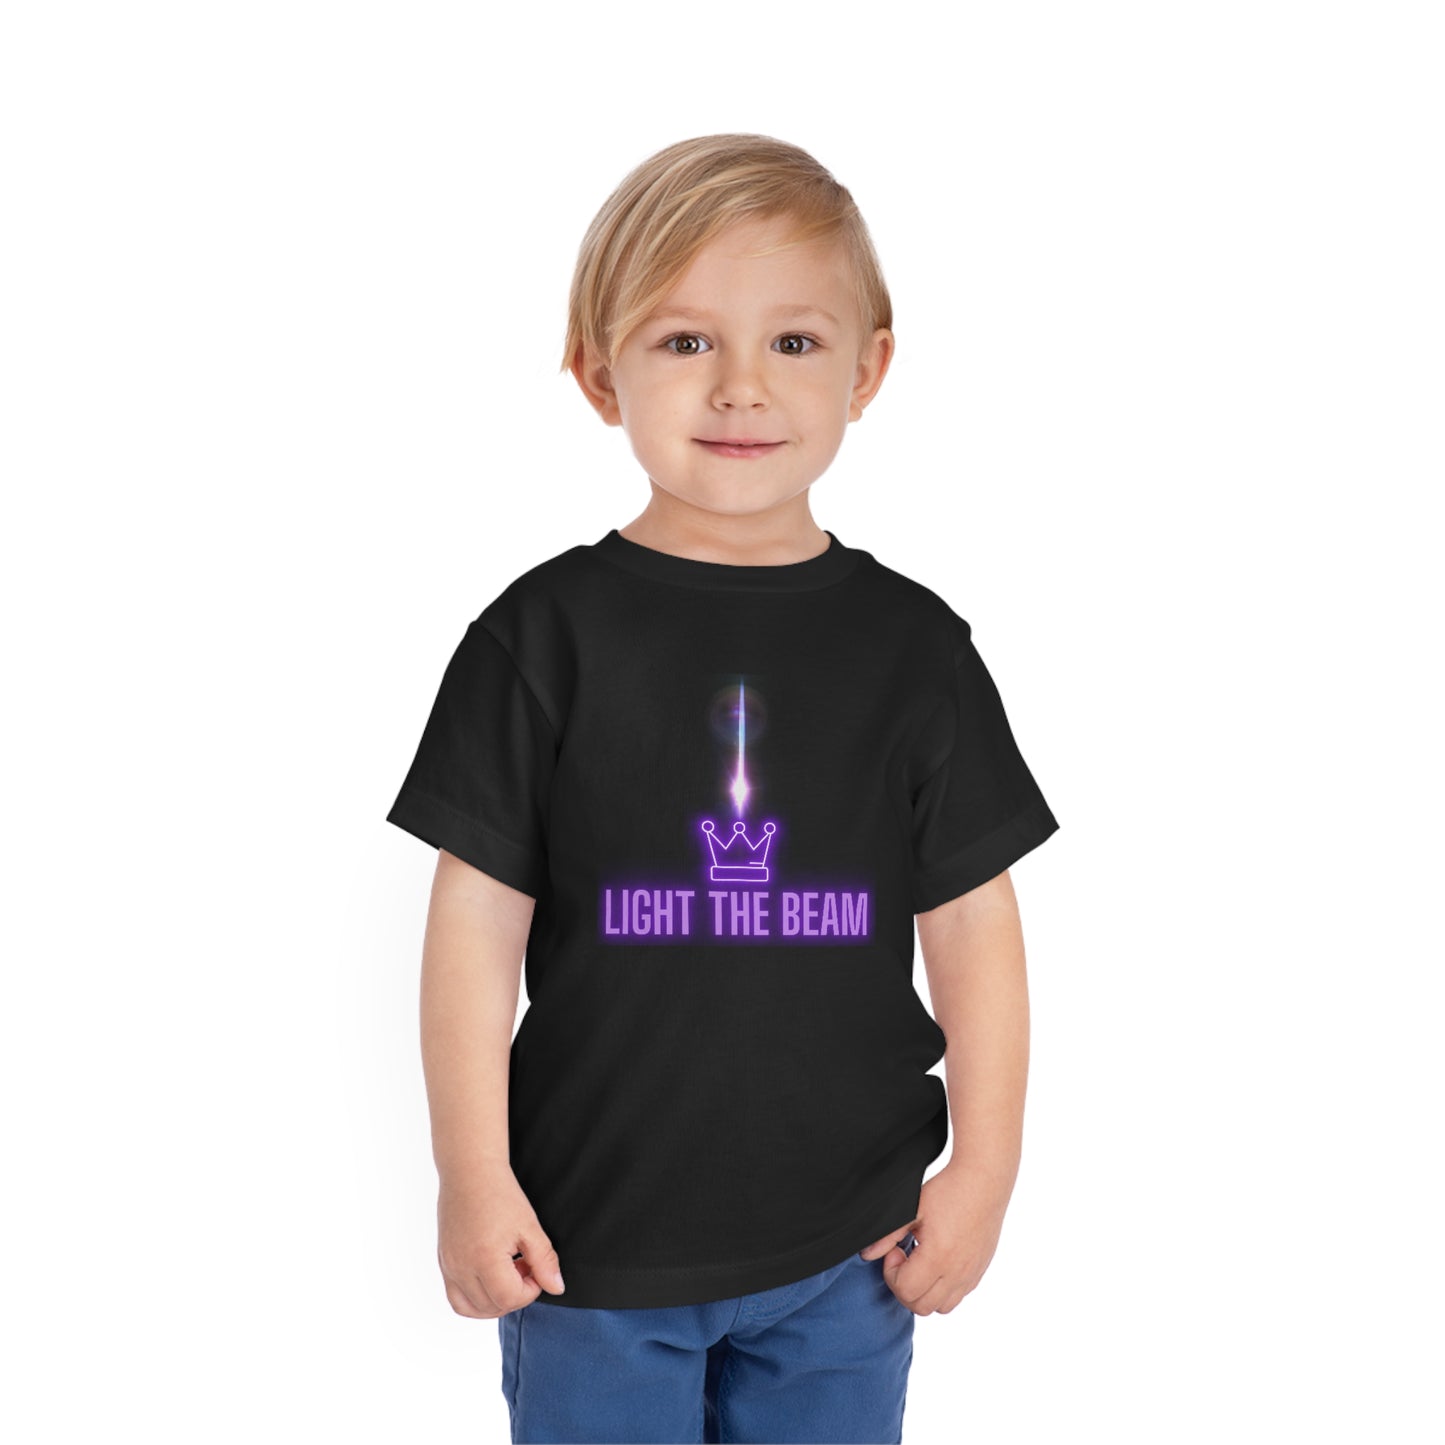 Light the Beam Kings Basketball, Toddler T-Shirt, Sacramento Basketball Shirt, Kings Fan Baby Tee Gift, Sacramento Gift for Toddler,Kids LOVE to Light the Beam! Celebrate another W - WIN - for your Kings Basketball team in this comfortable, cool toddler T-shirt. Perfect to wear at the game or on the playground the day after another W. Show off your Sac-Town pride! 